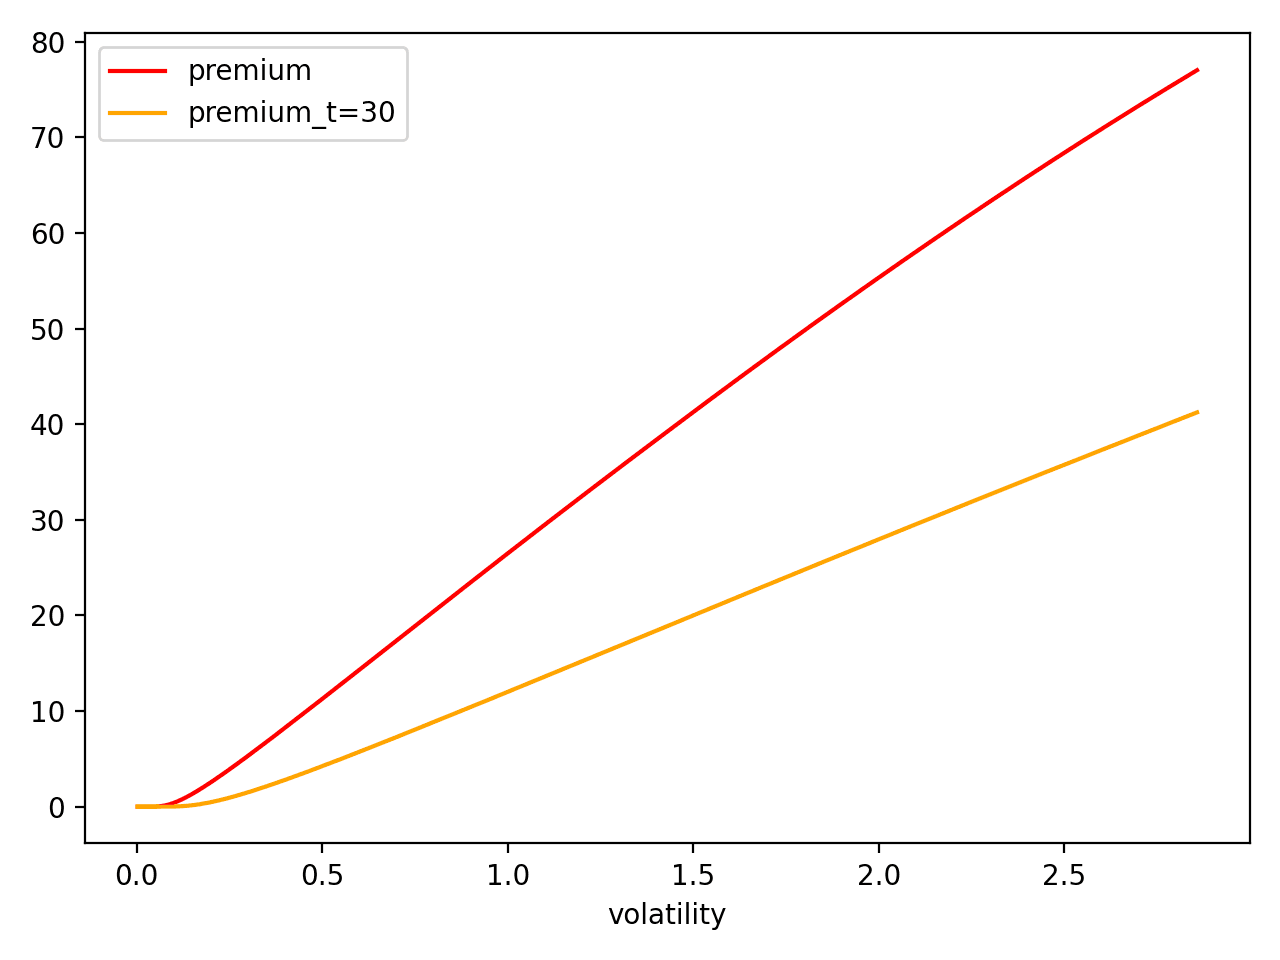 https://polygon.io/blog/content/images/2022/02/fig2b_aapl_premium.png